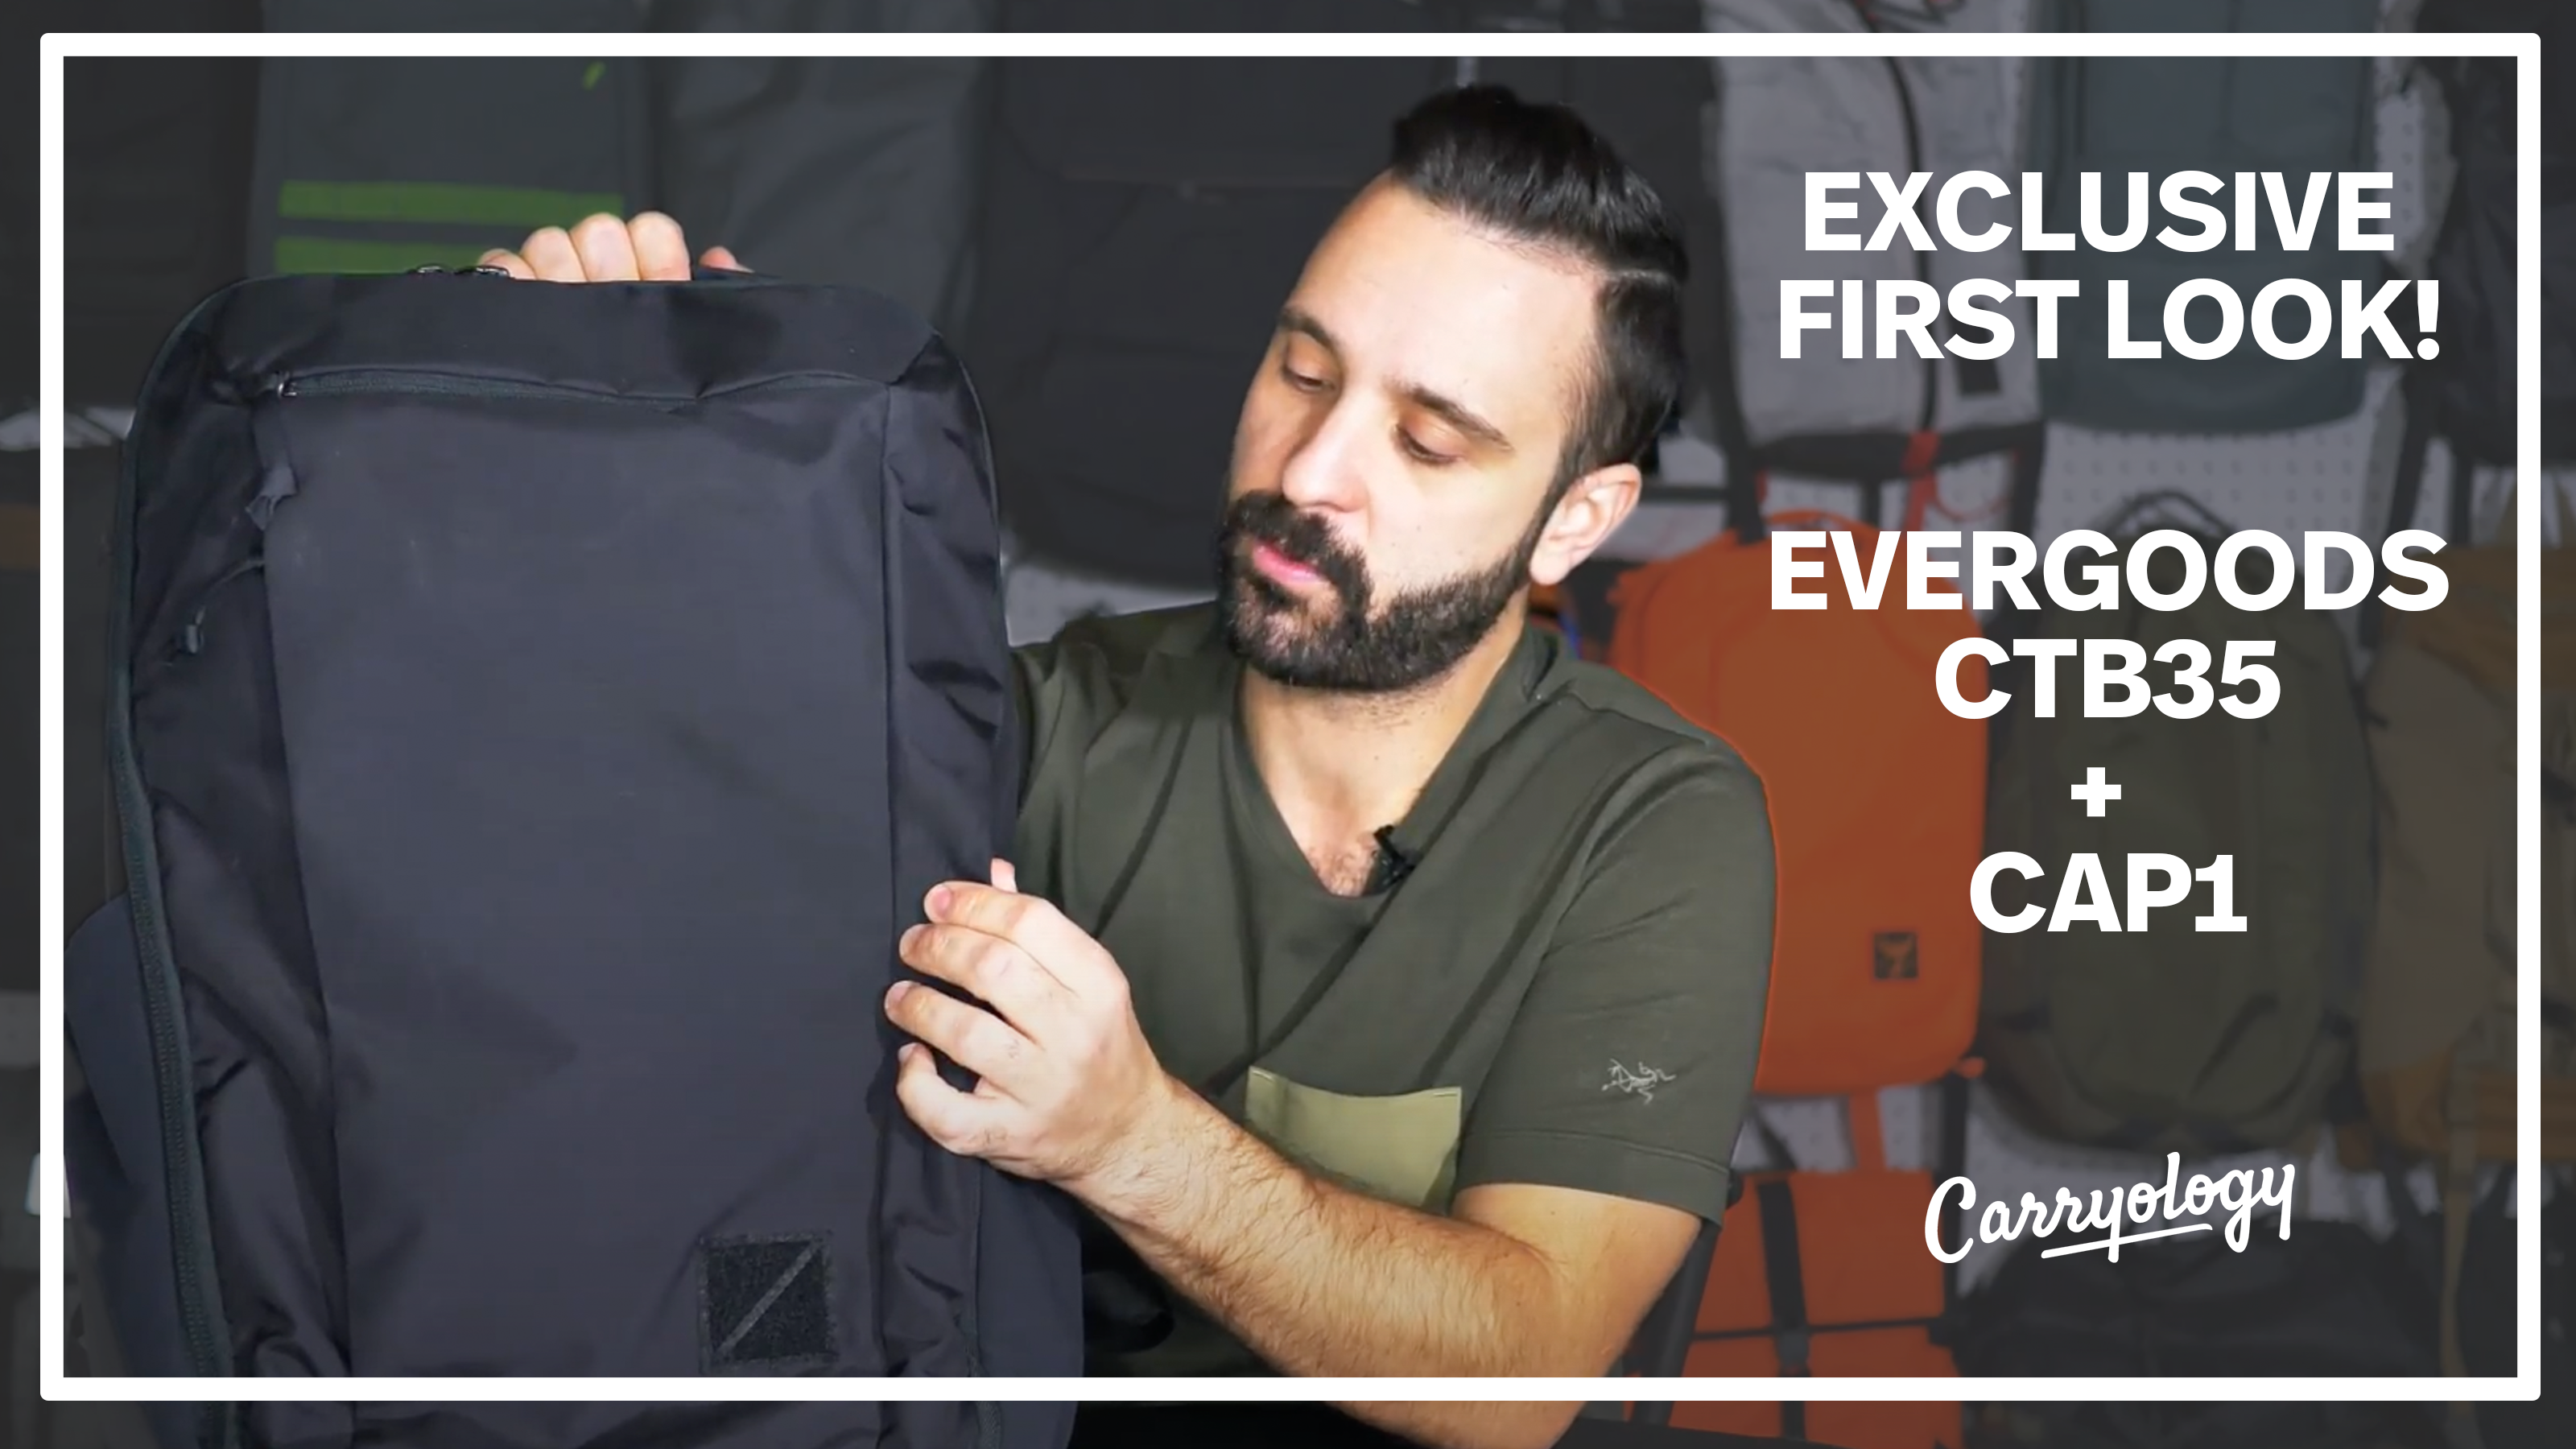 Exclusive First Look! Evergoods CTB35 and CAP1